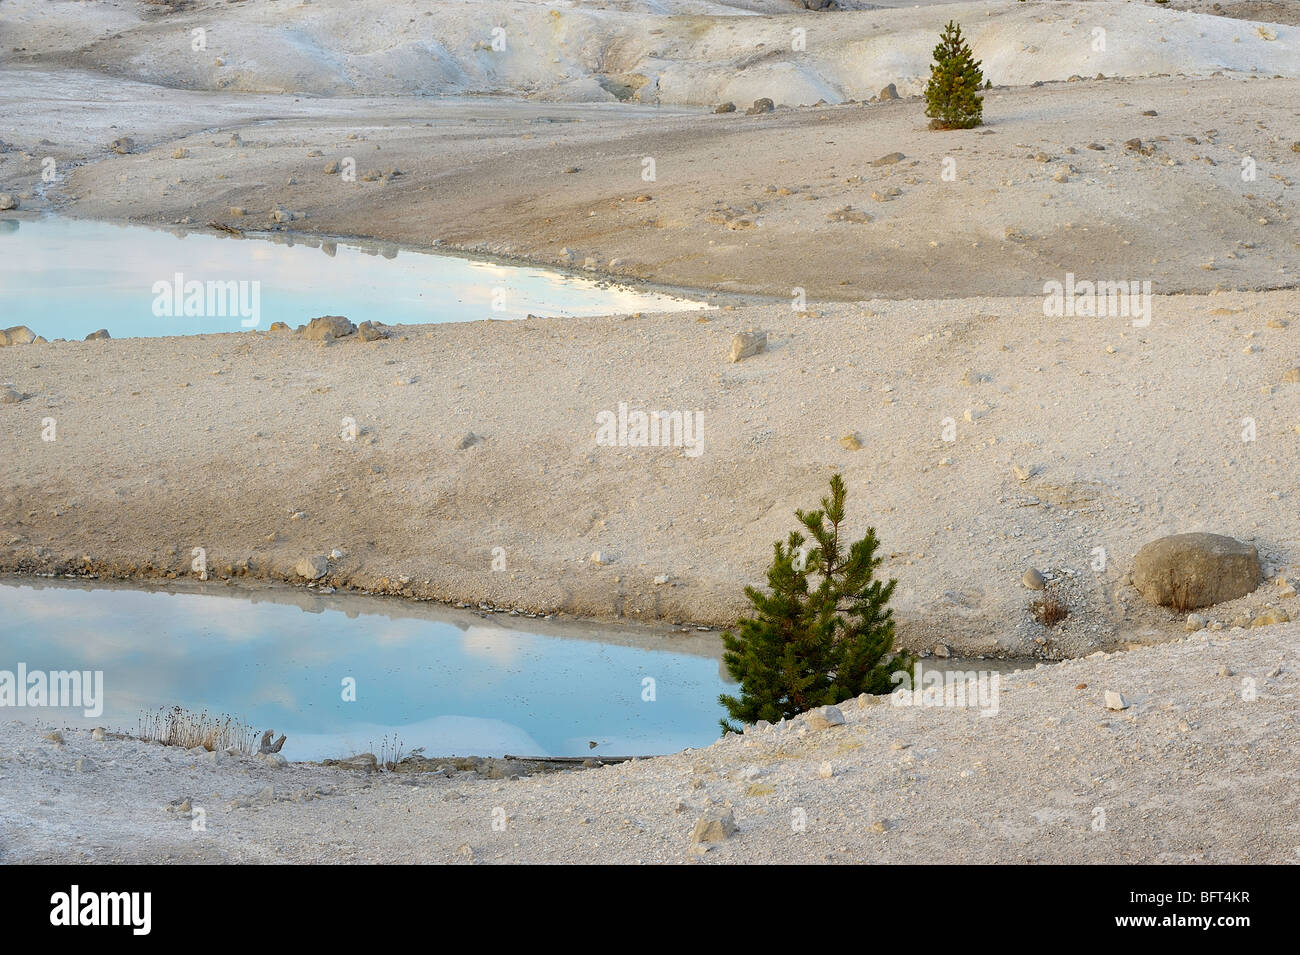 Porcelain Basin- Hot springs and pine trees, Yellowstone National Park, Wyoming, USA Stock Photo